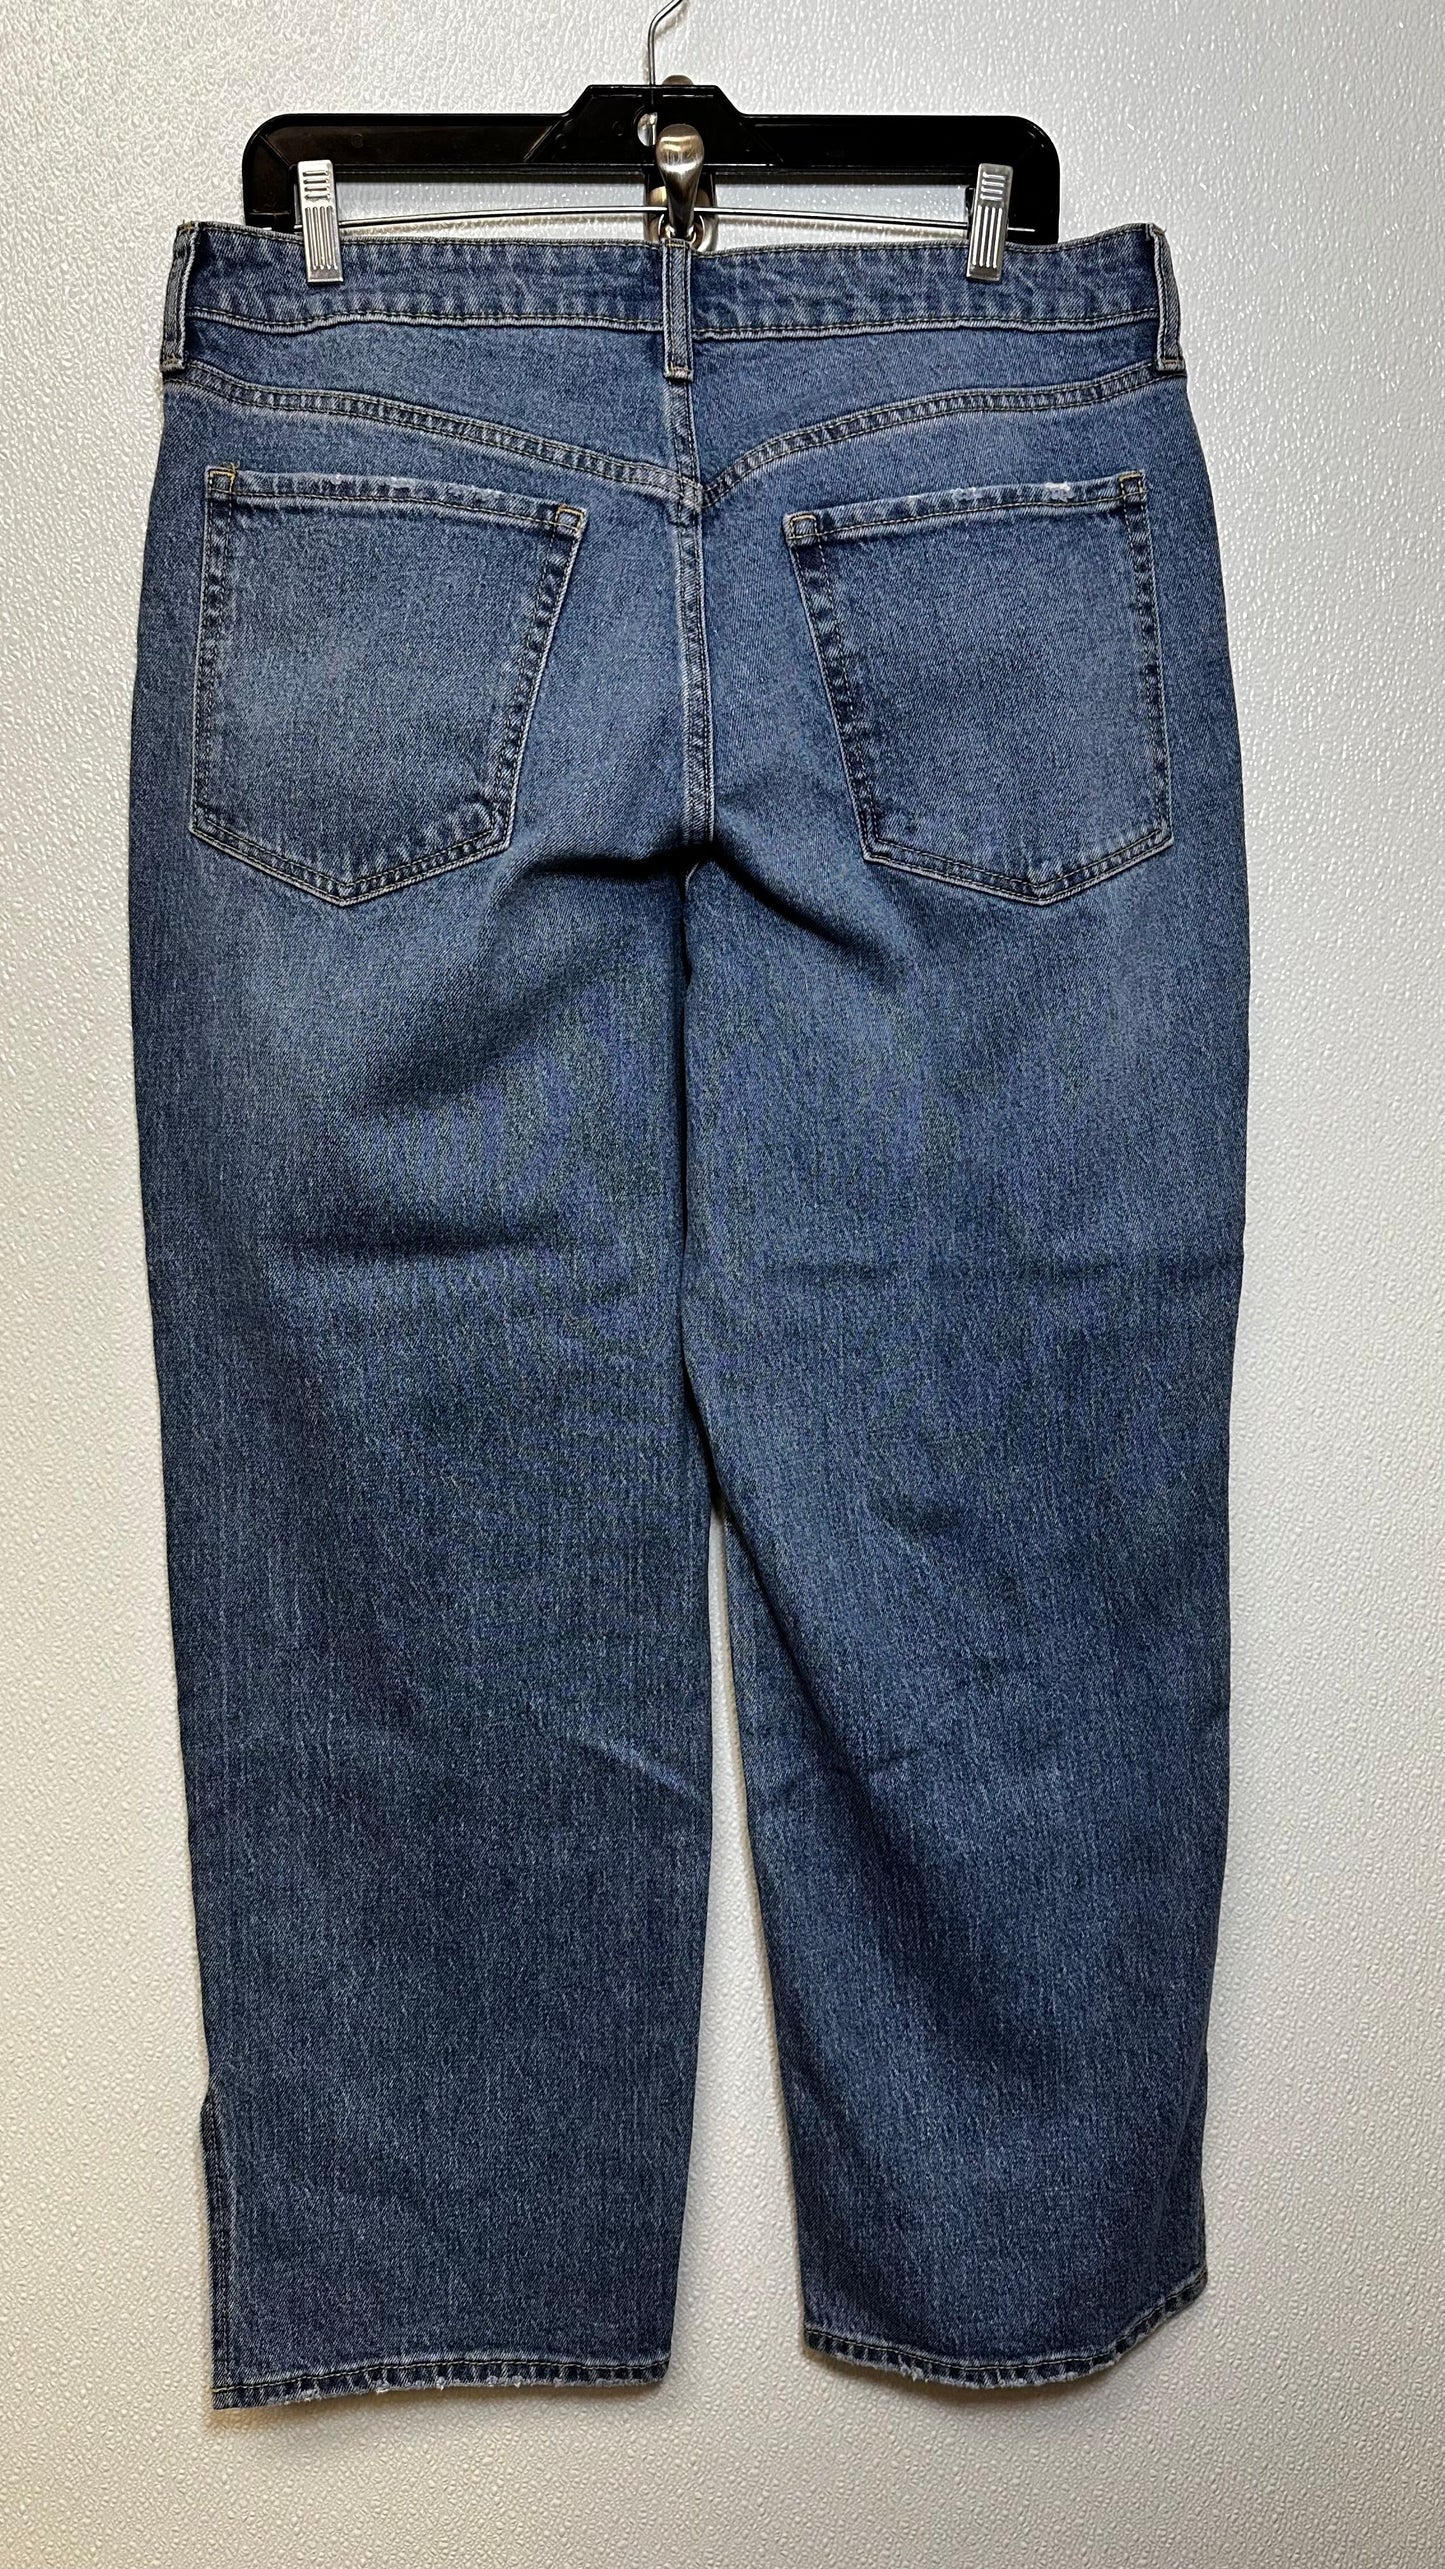 Denim Jeans Cropped Old Navy O, Size 14petite